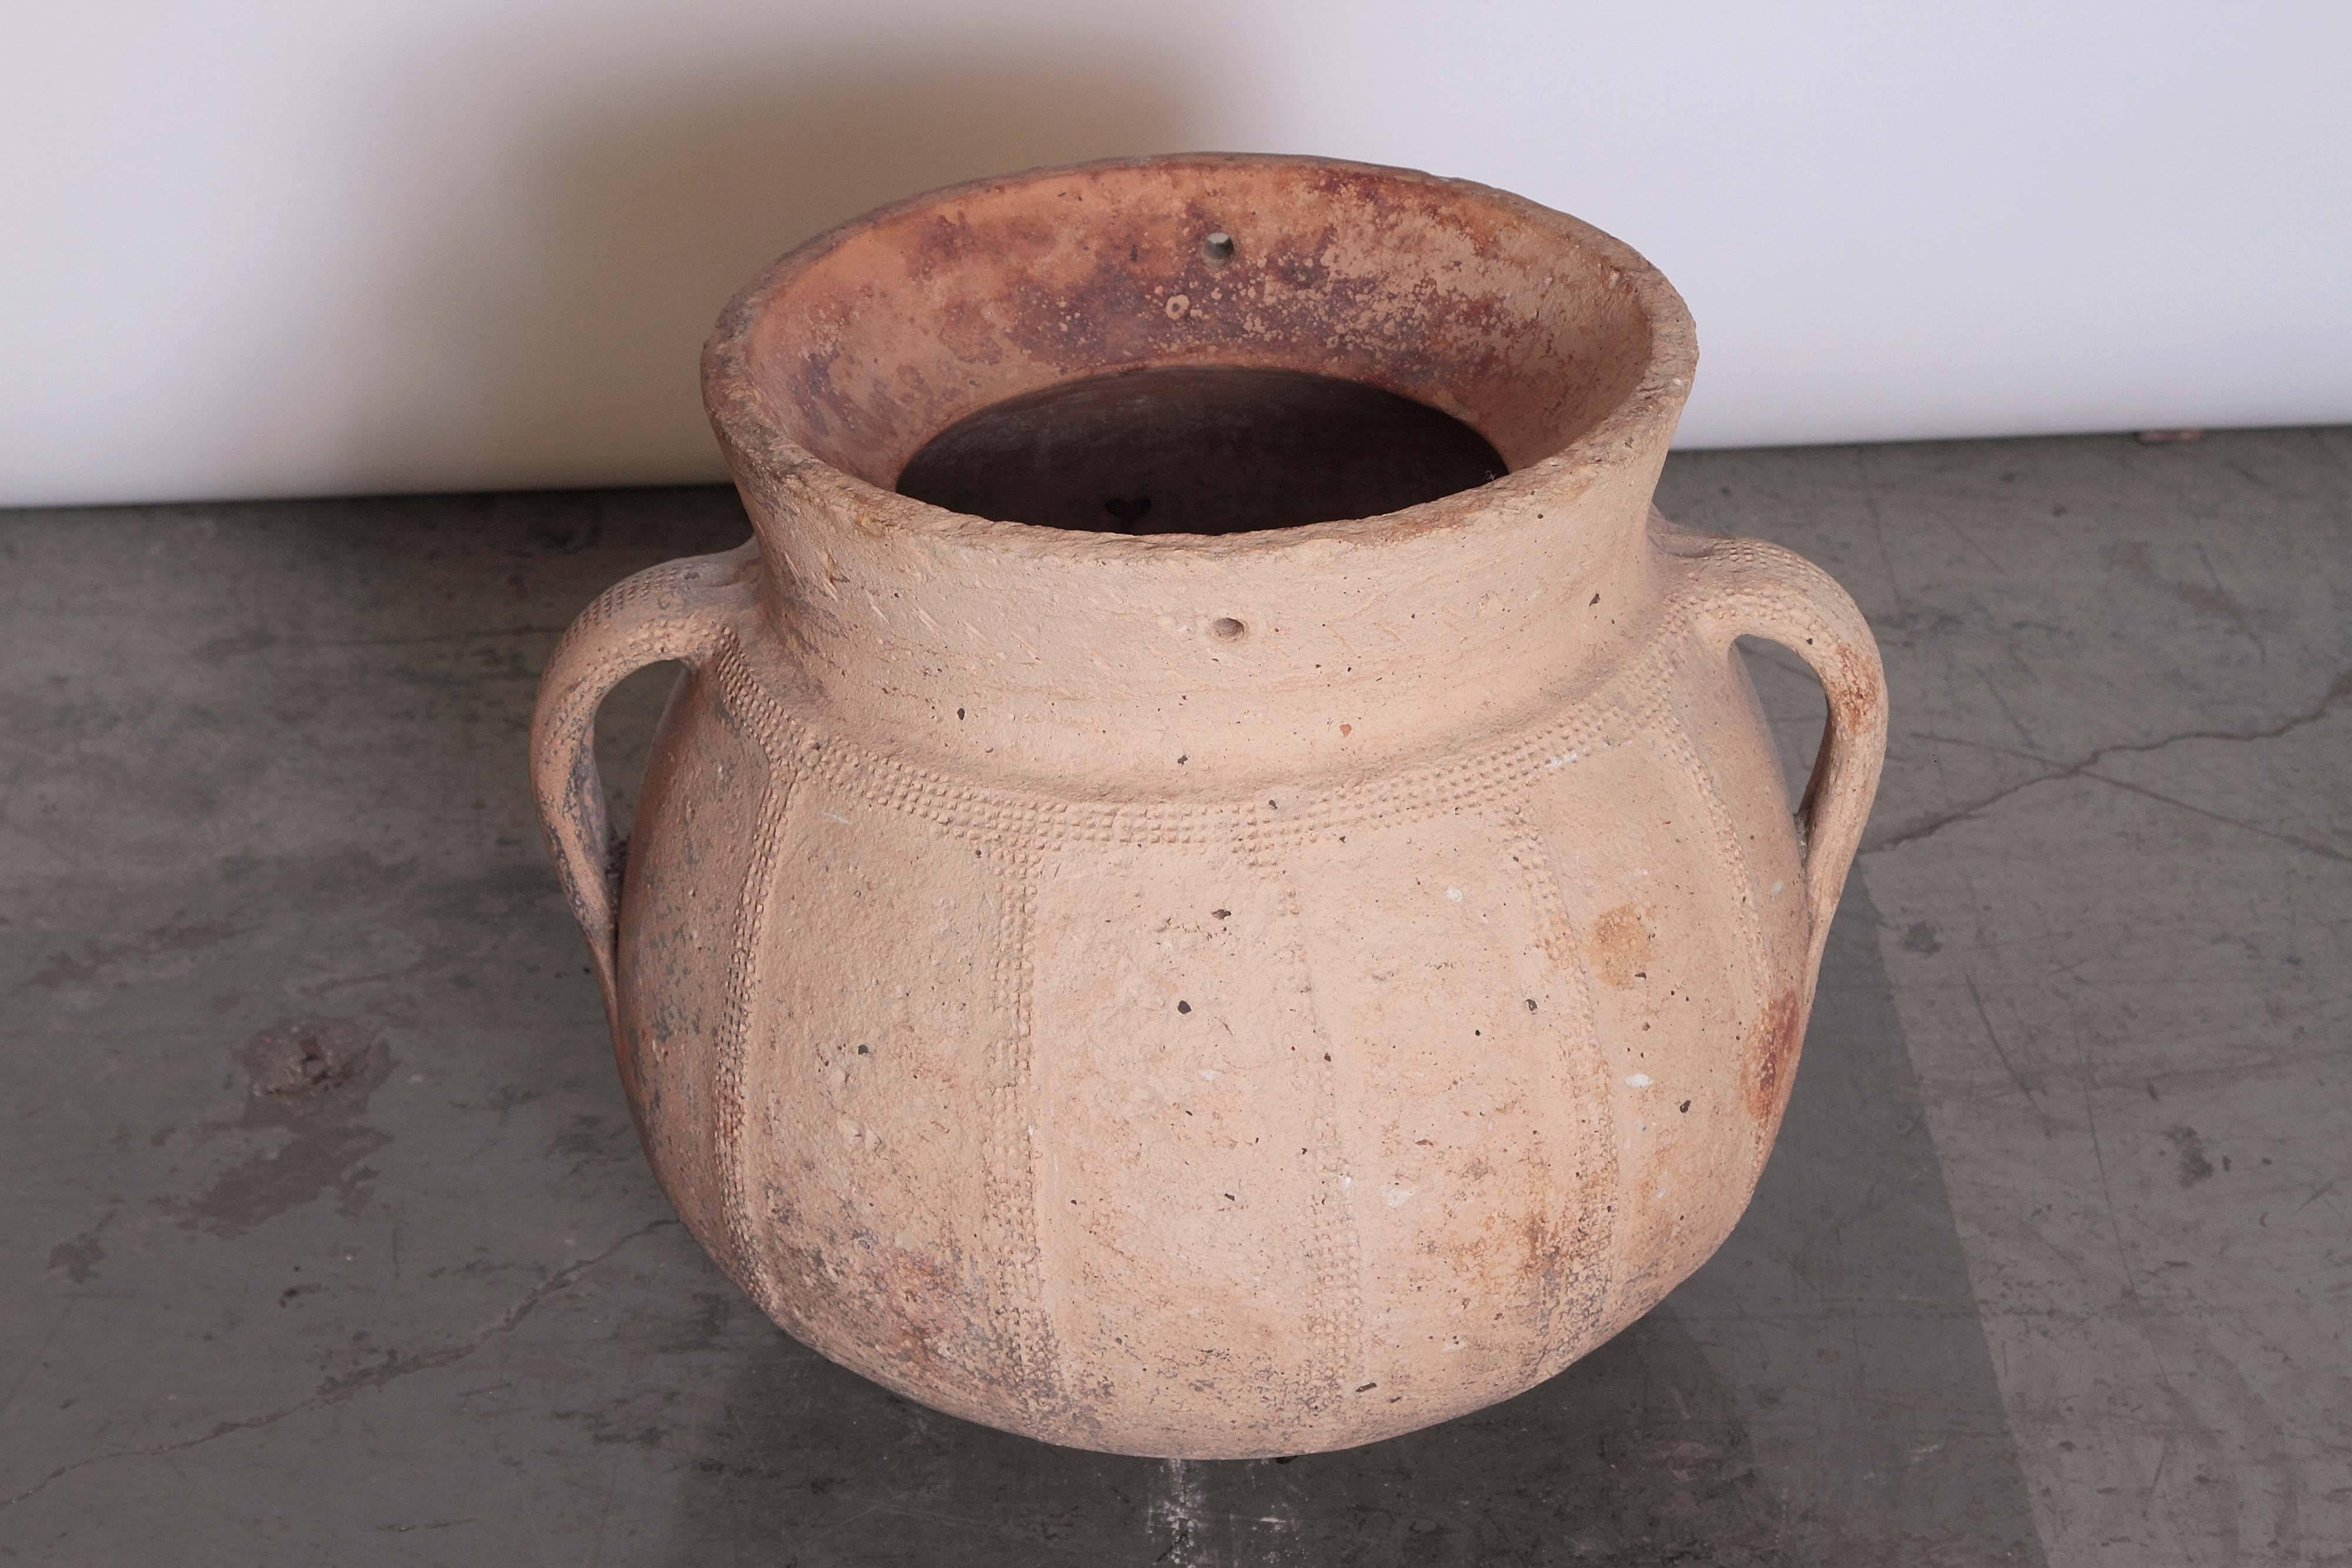 Beautiful and large, 2-handled pot archaic style terracotta pot. Wonderful patina and coloration throughout.